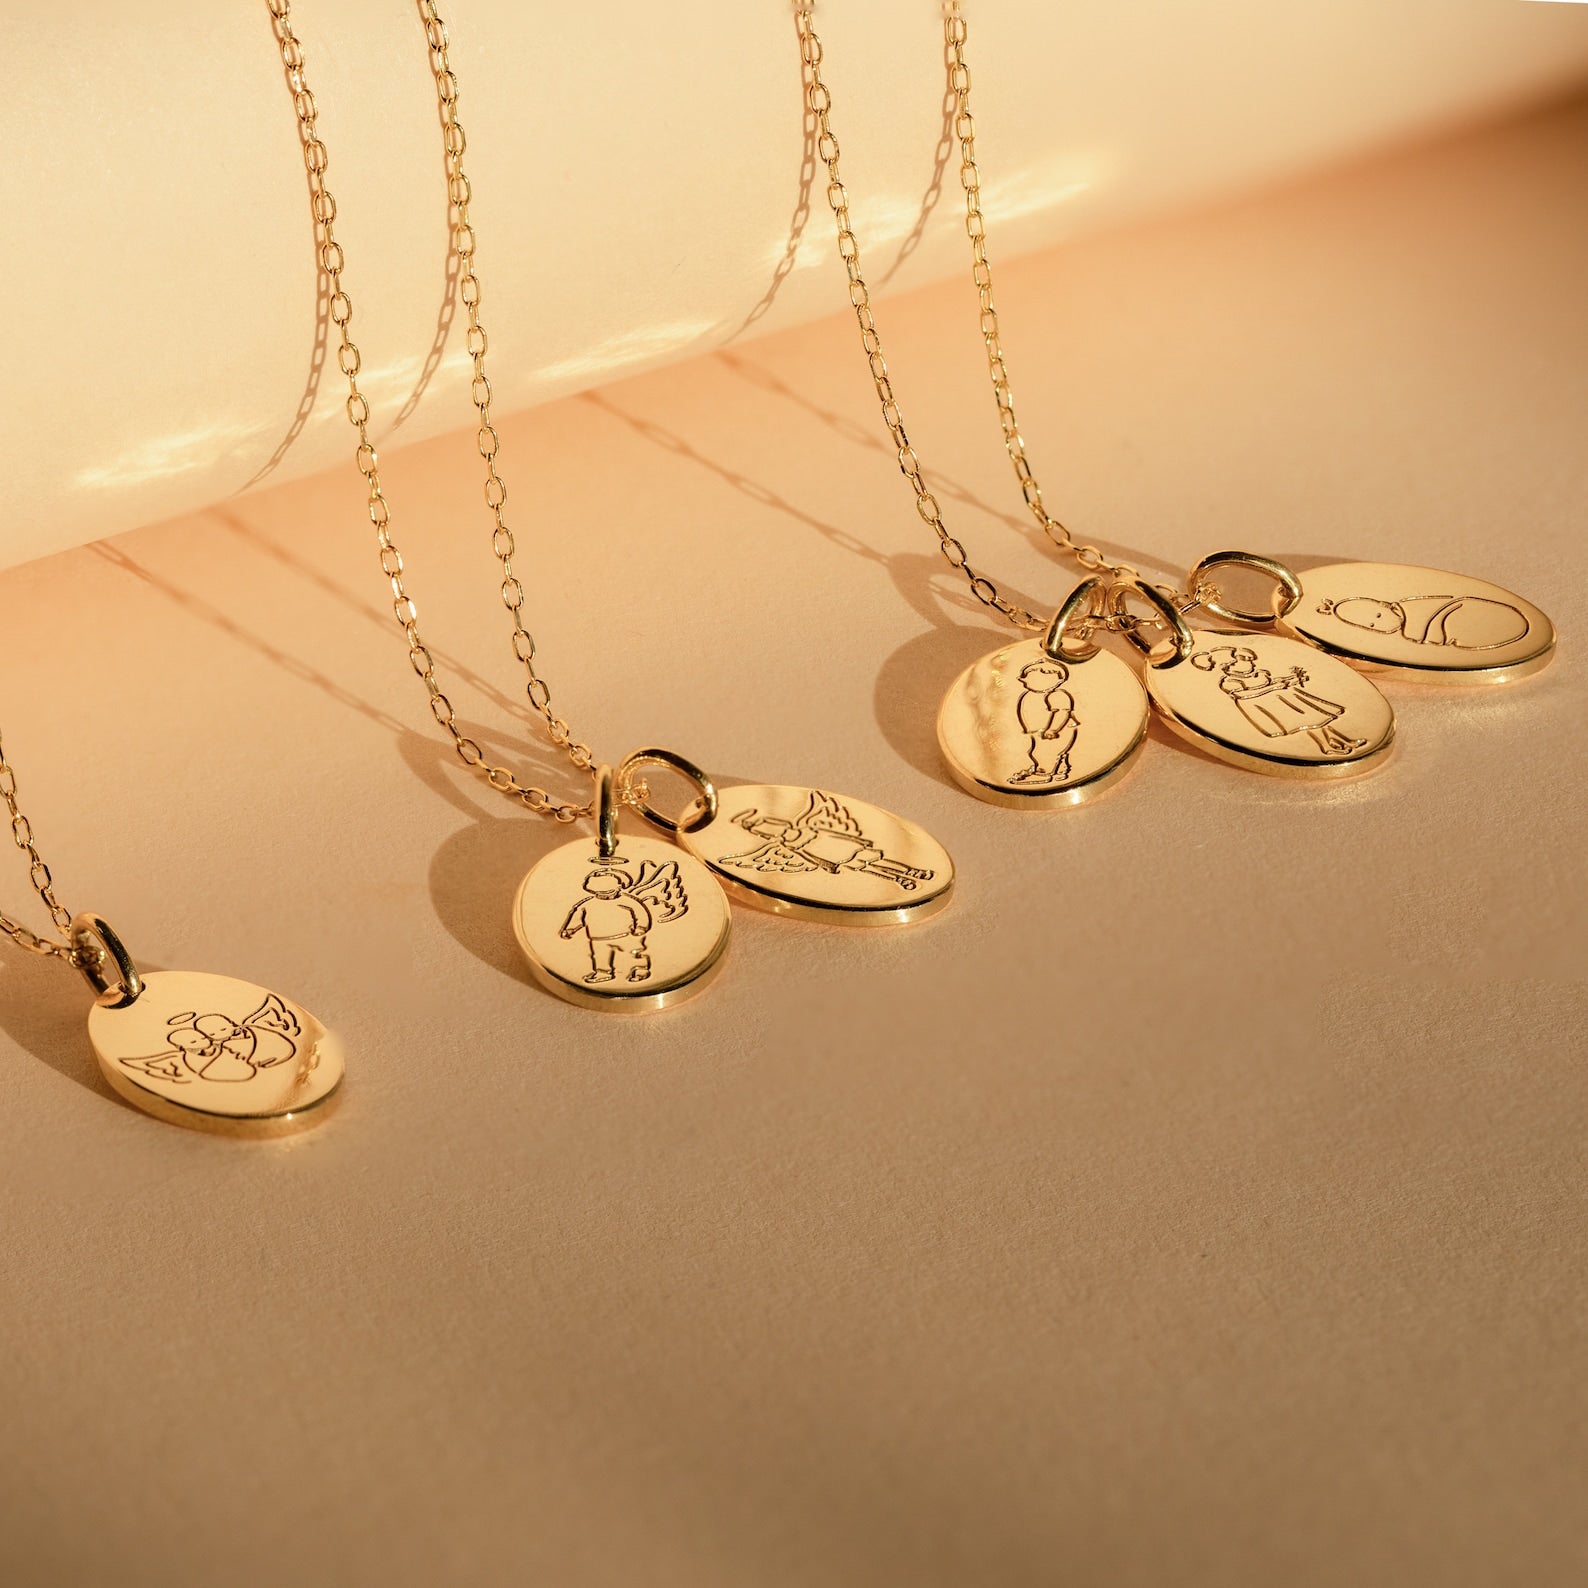 Necklace With Multiple Small Discs, With Custom Engraving | Gold, Silver or  Rose Gold | Length 17'', 18'', 19'', 20'' - Elysium Hope